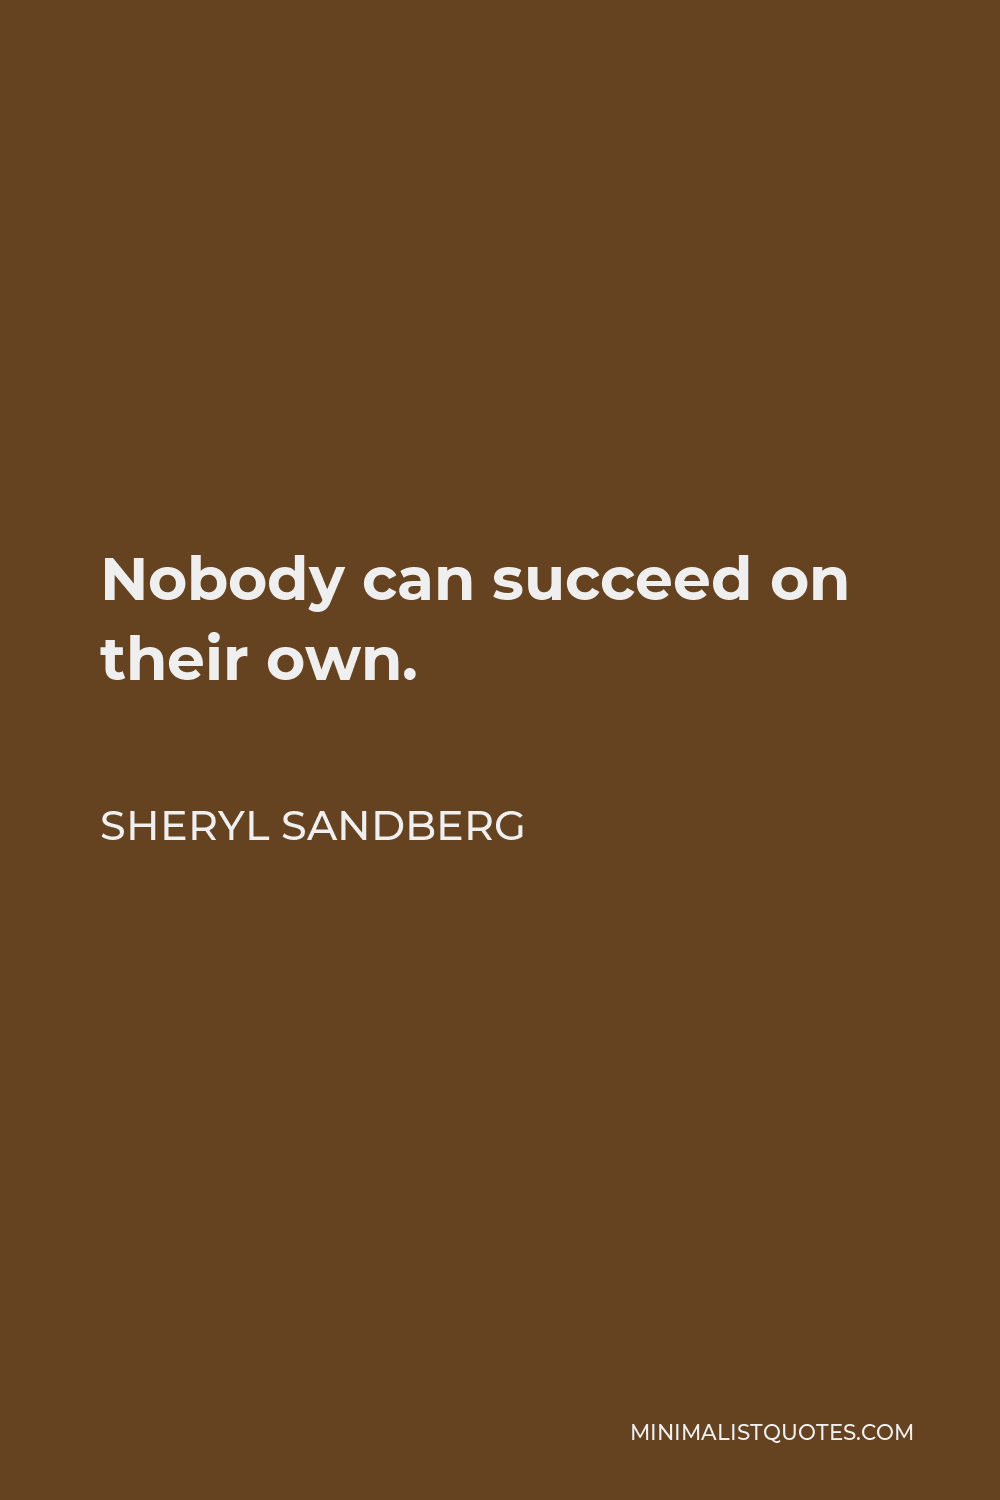 Sheryl Sandberg Quote - Nobody can succeed on their own.